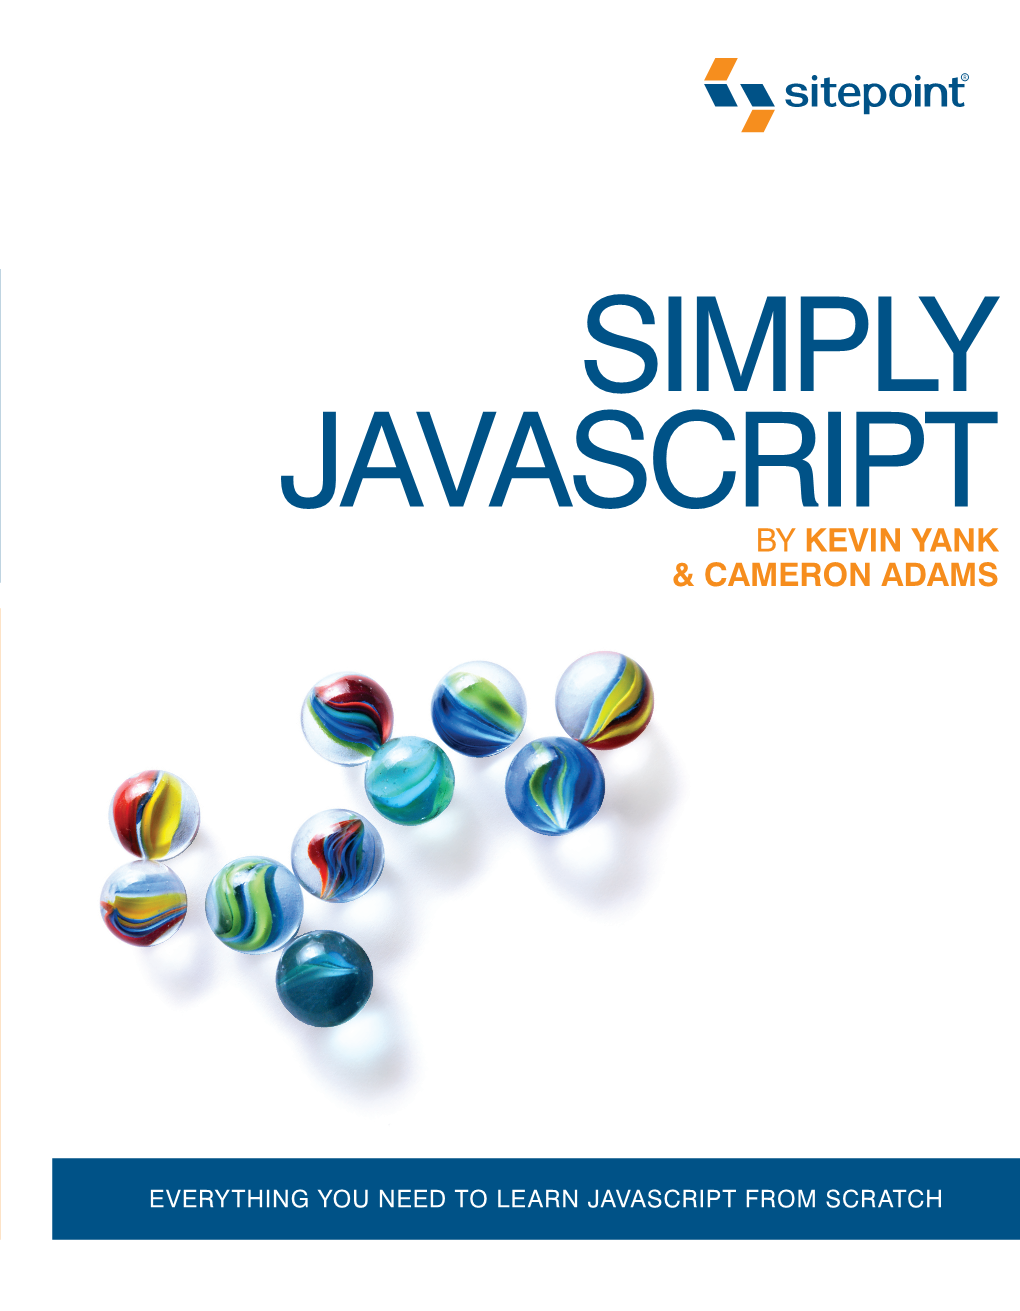 Simply Javascript Is a Step-By-Step Introduction to Programming in Javascript the Right Way